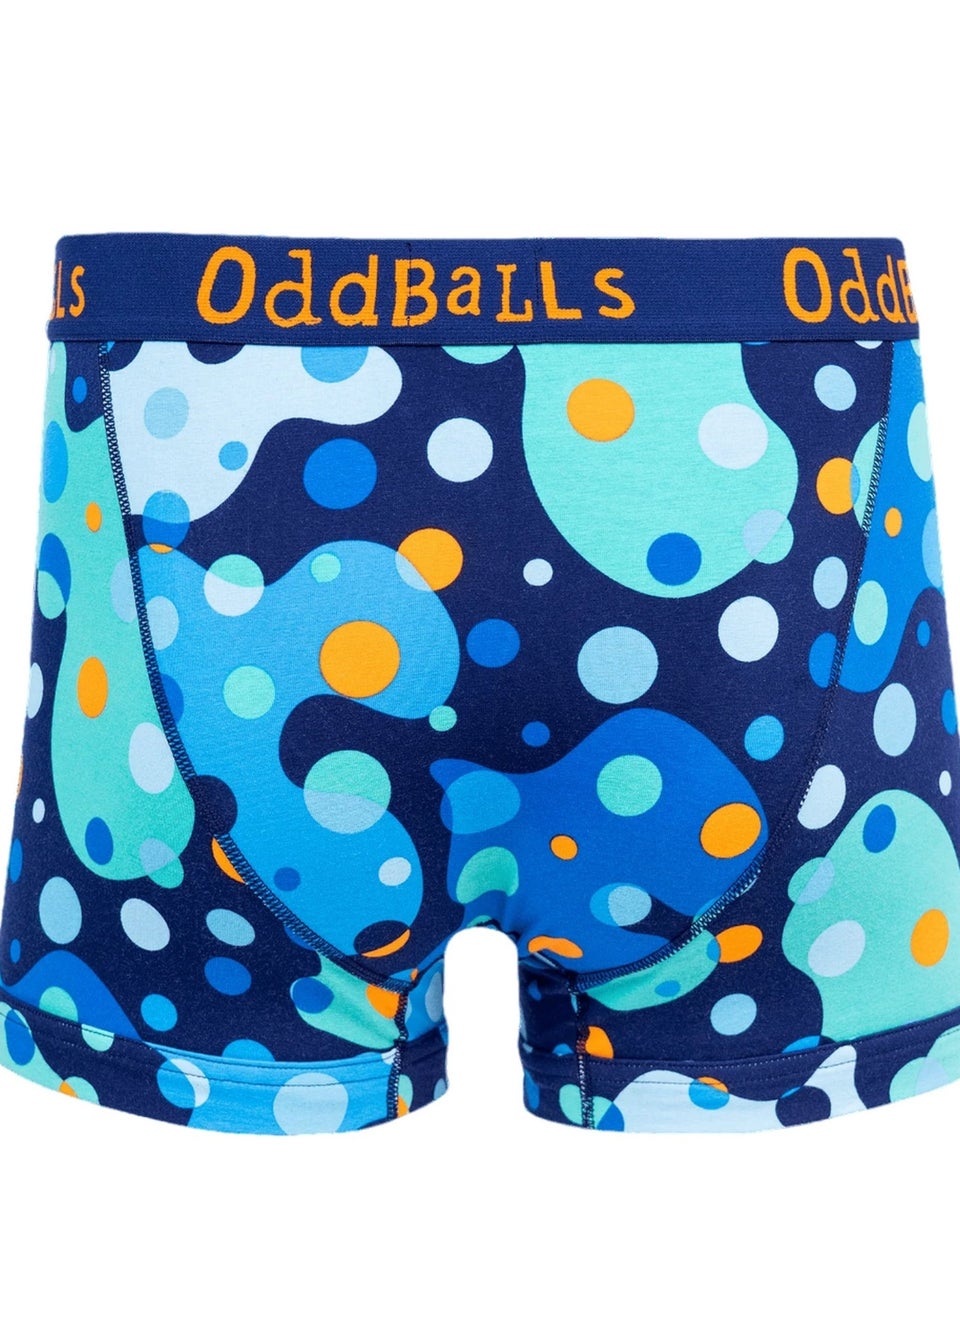 OddBalls Blue Space Balls Spotted Boxer Shorts